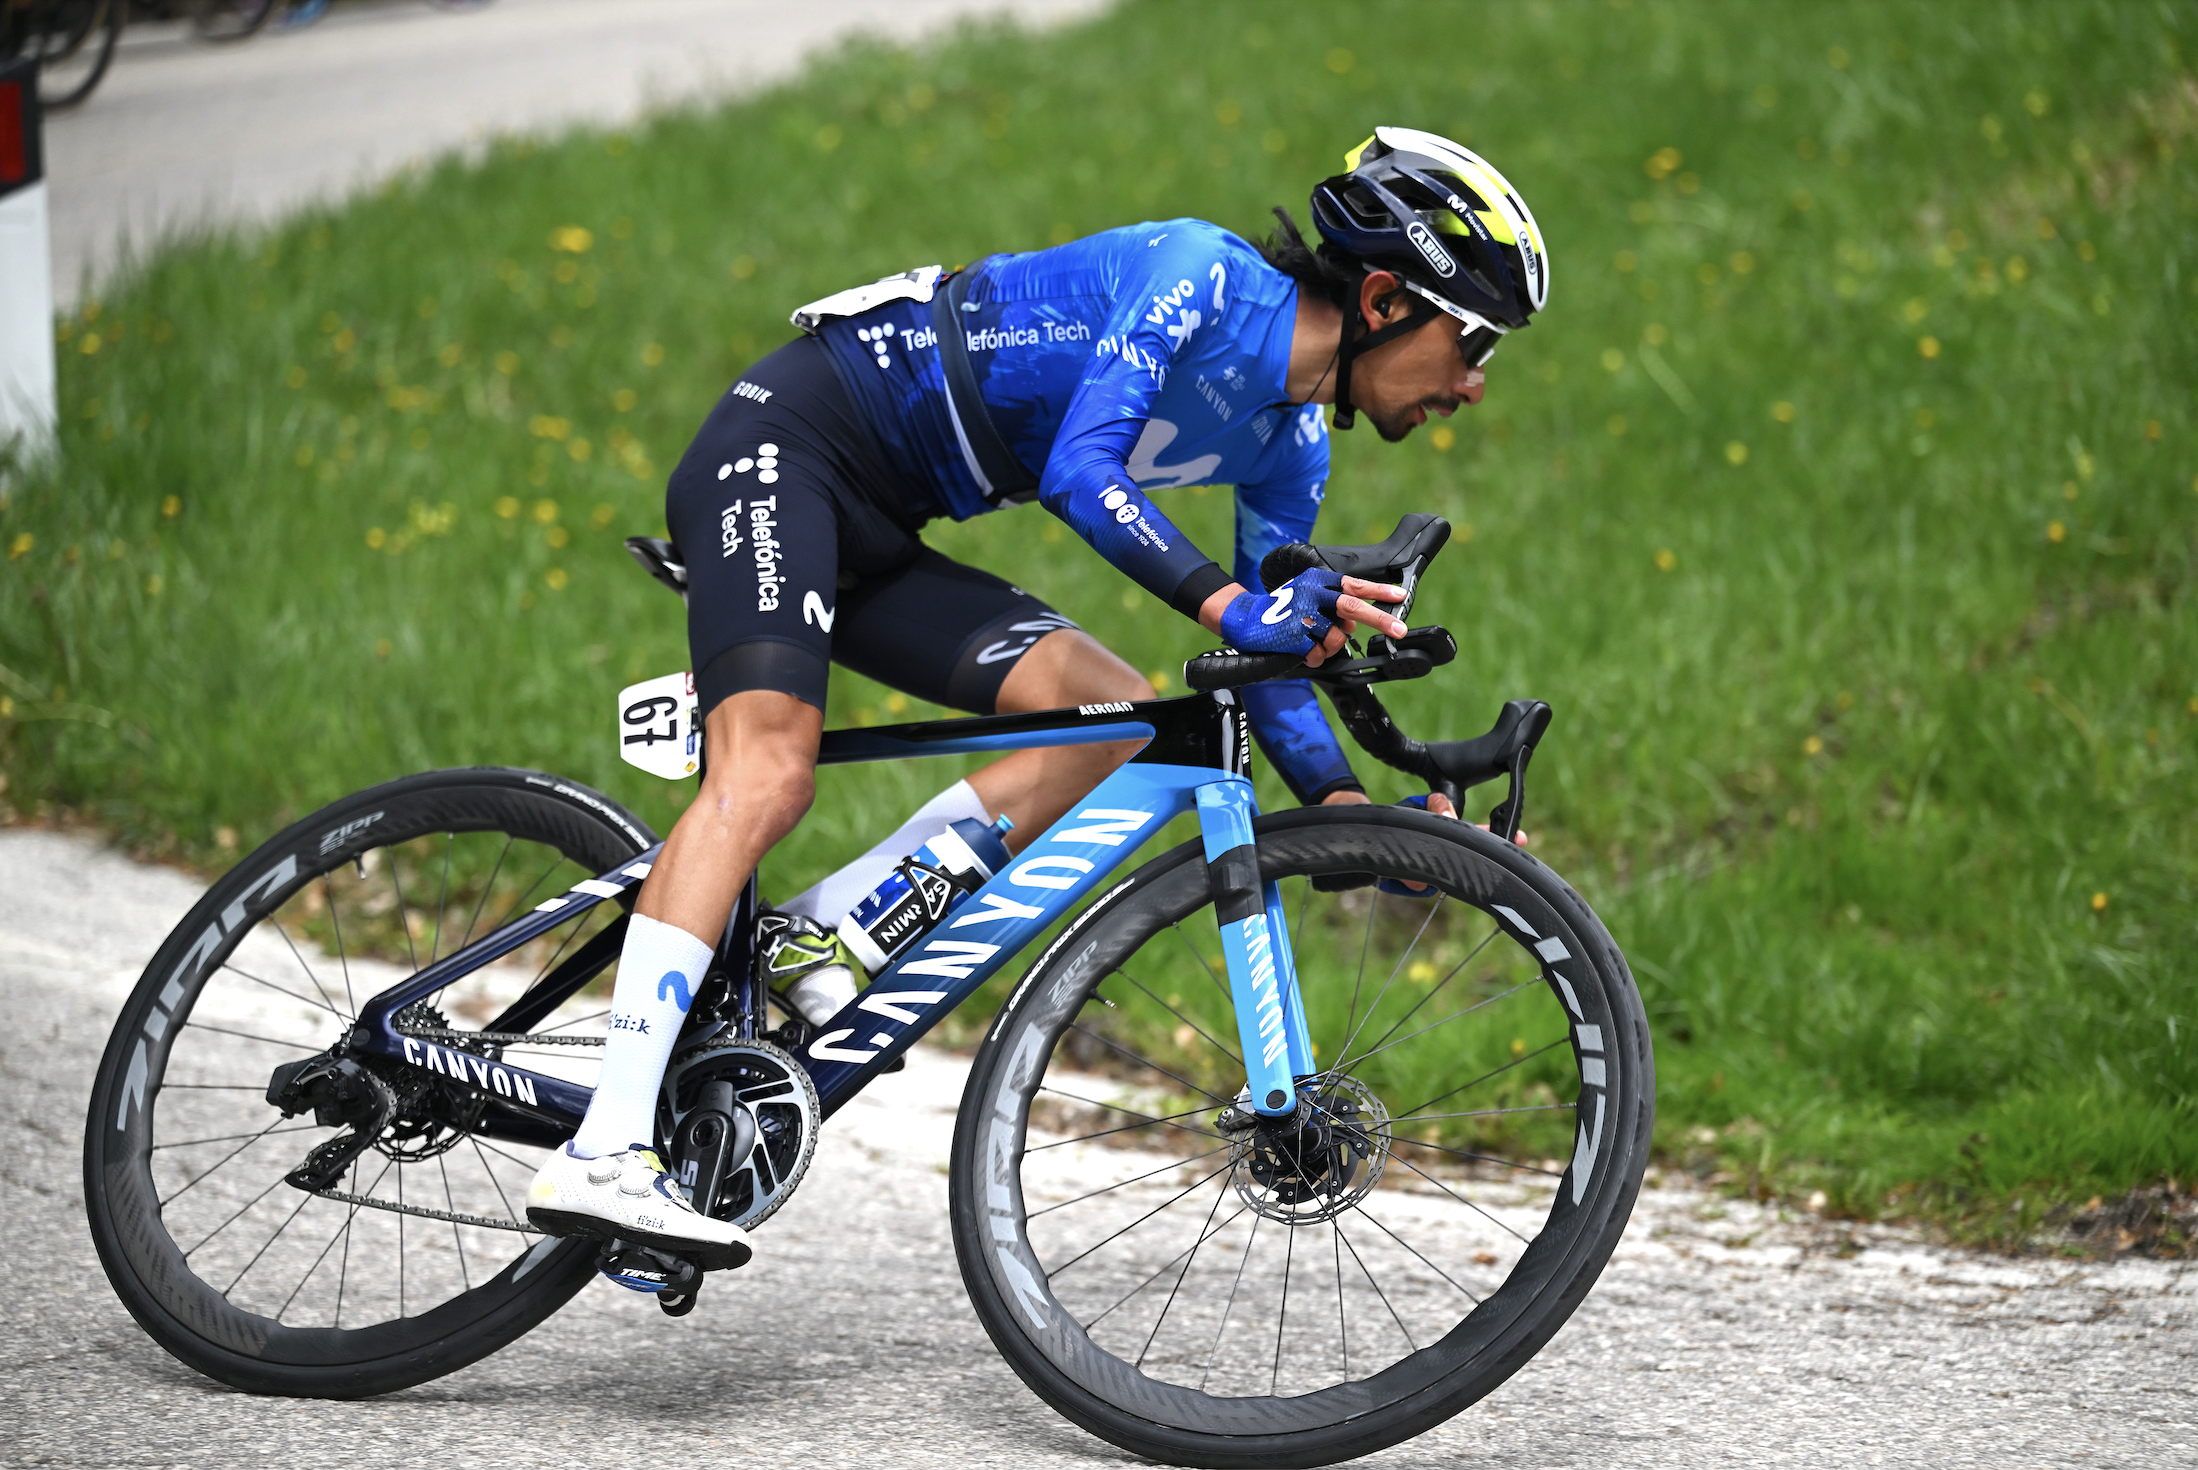 Iván Sosa finishes 9th in GC